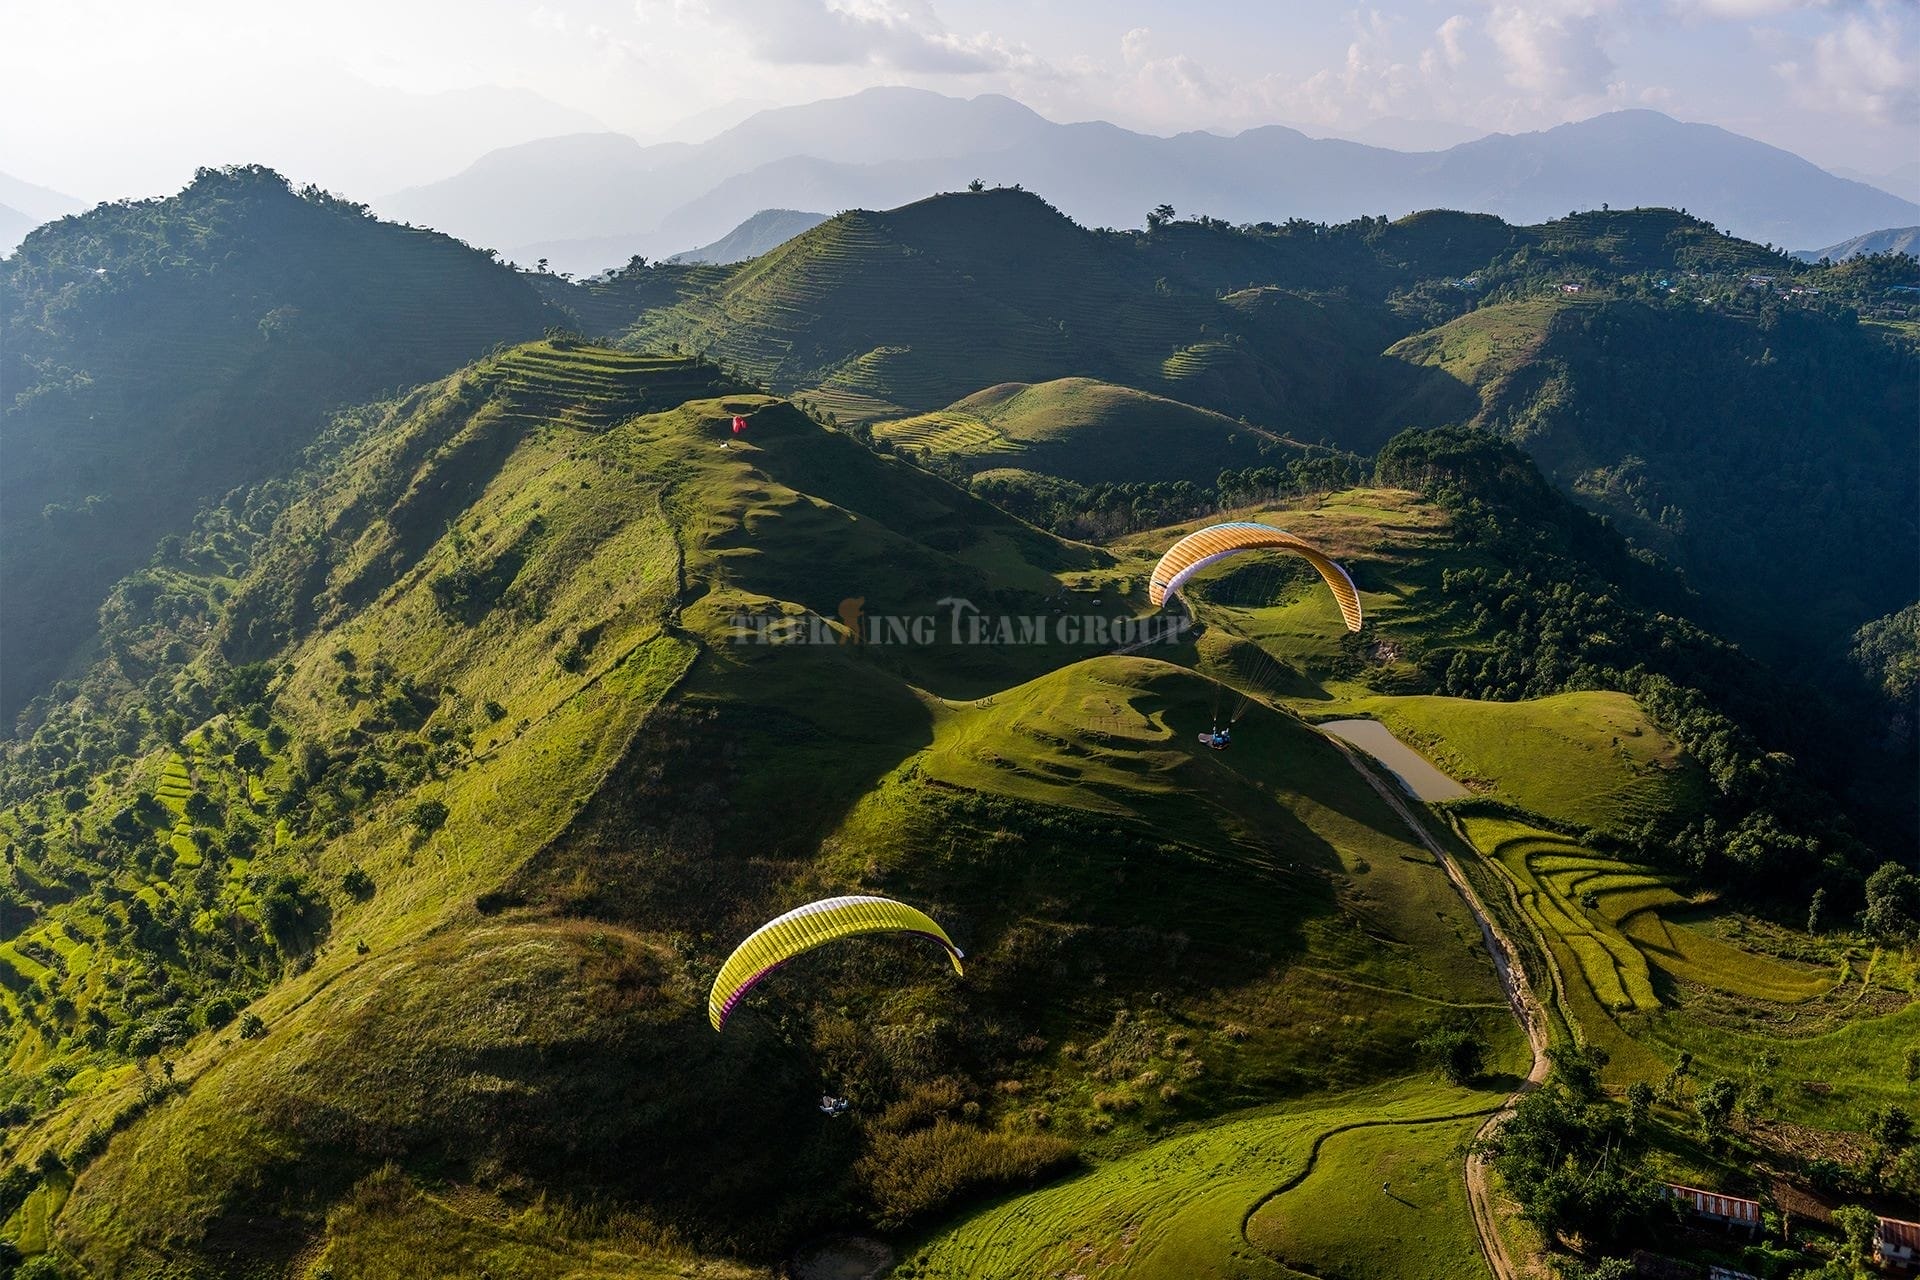 Paragliding In Pokhara